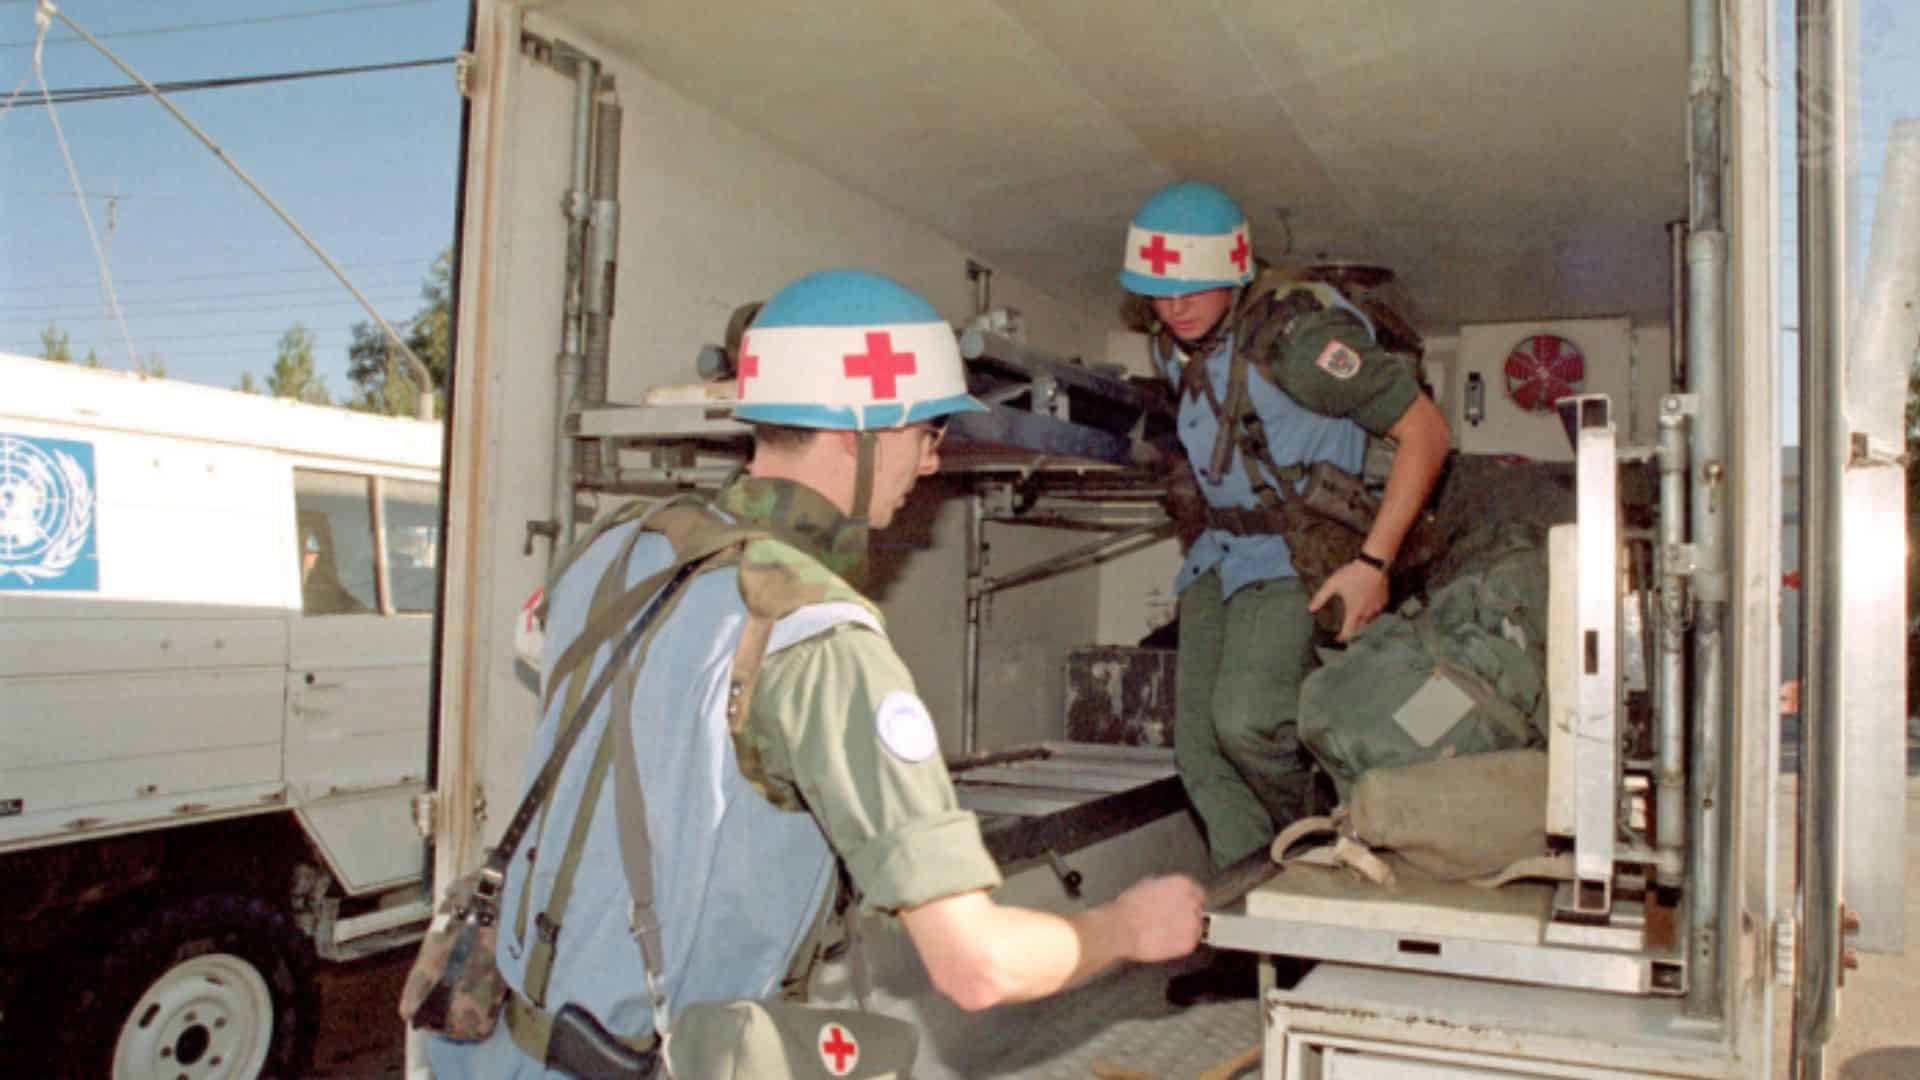 United Nations humanitarian aid workers unload supplies from their vehicle